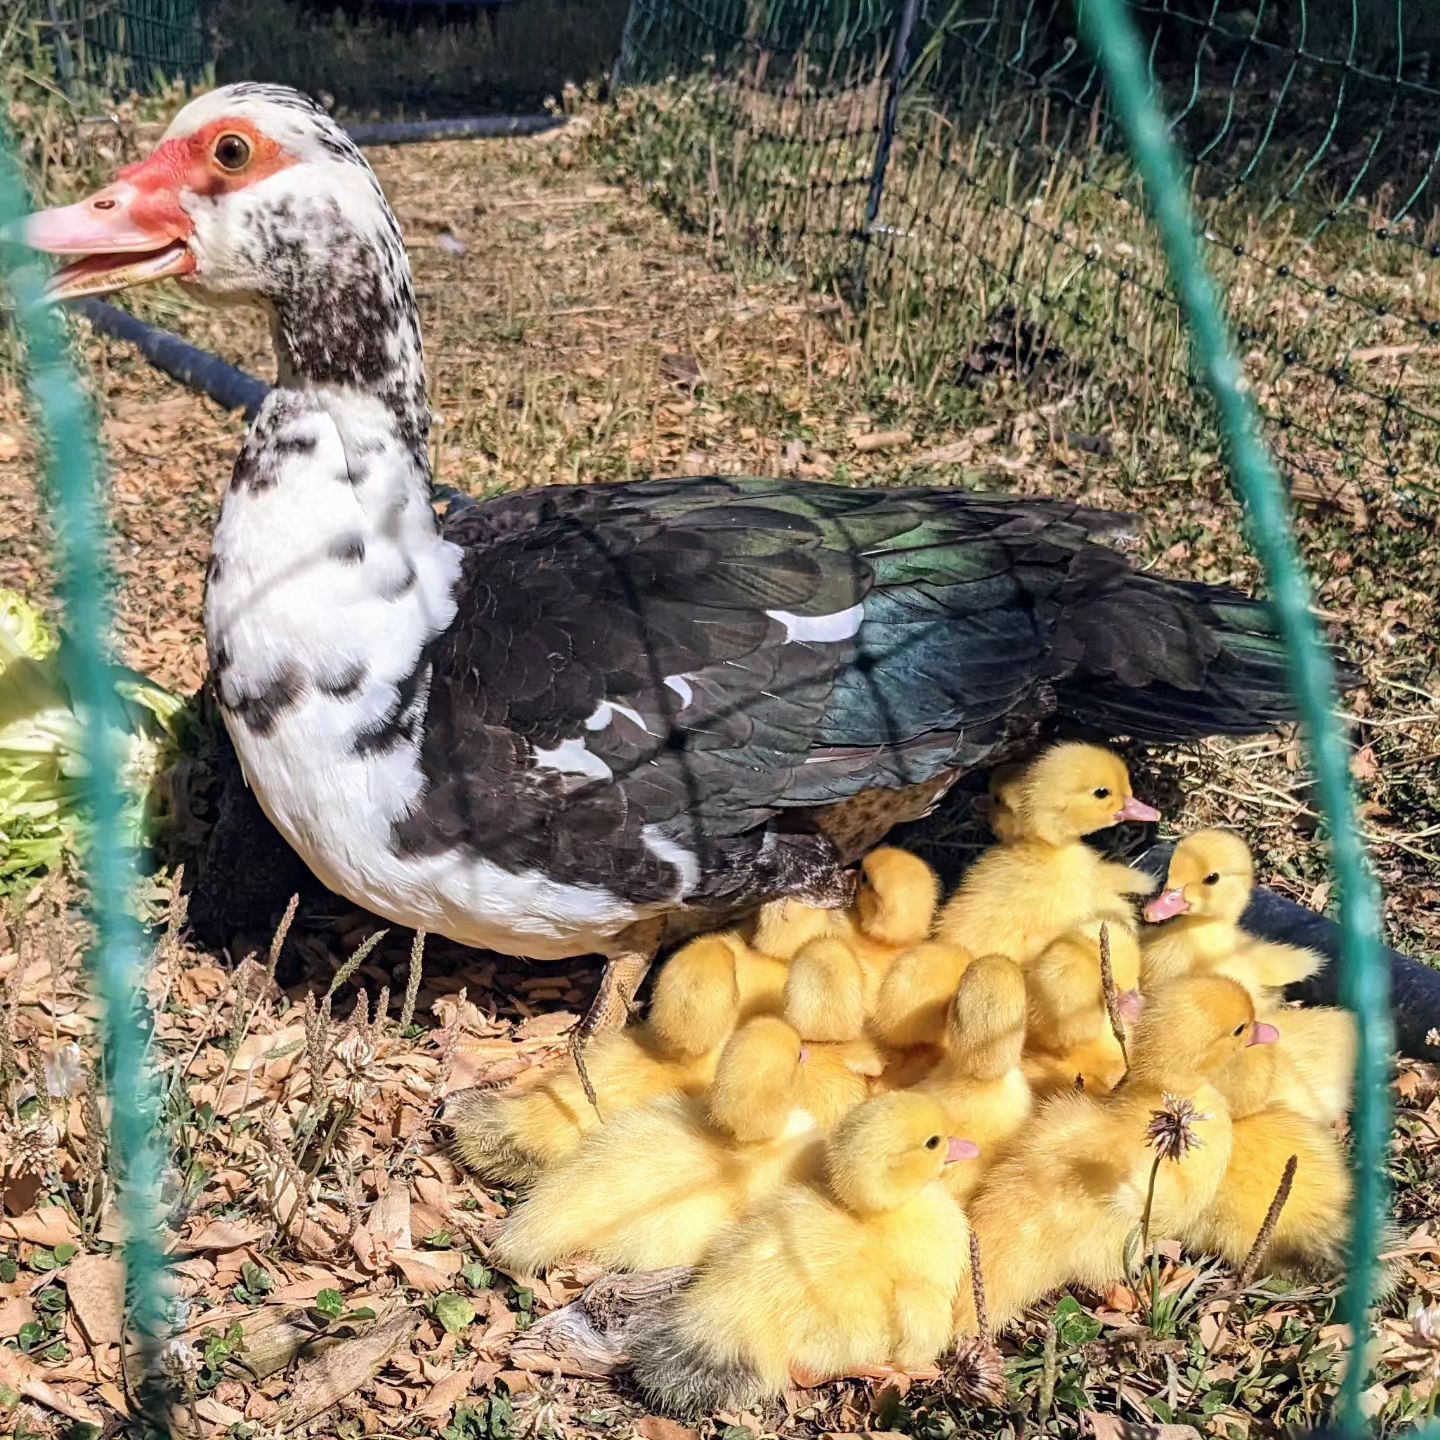 Momma Muscovy took the ducklings out!